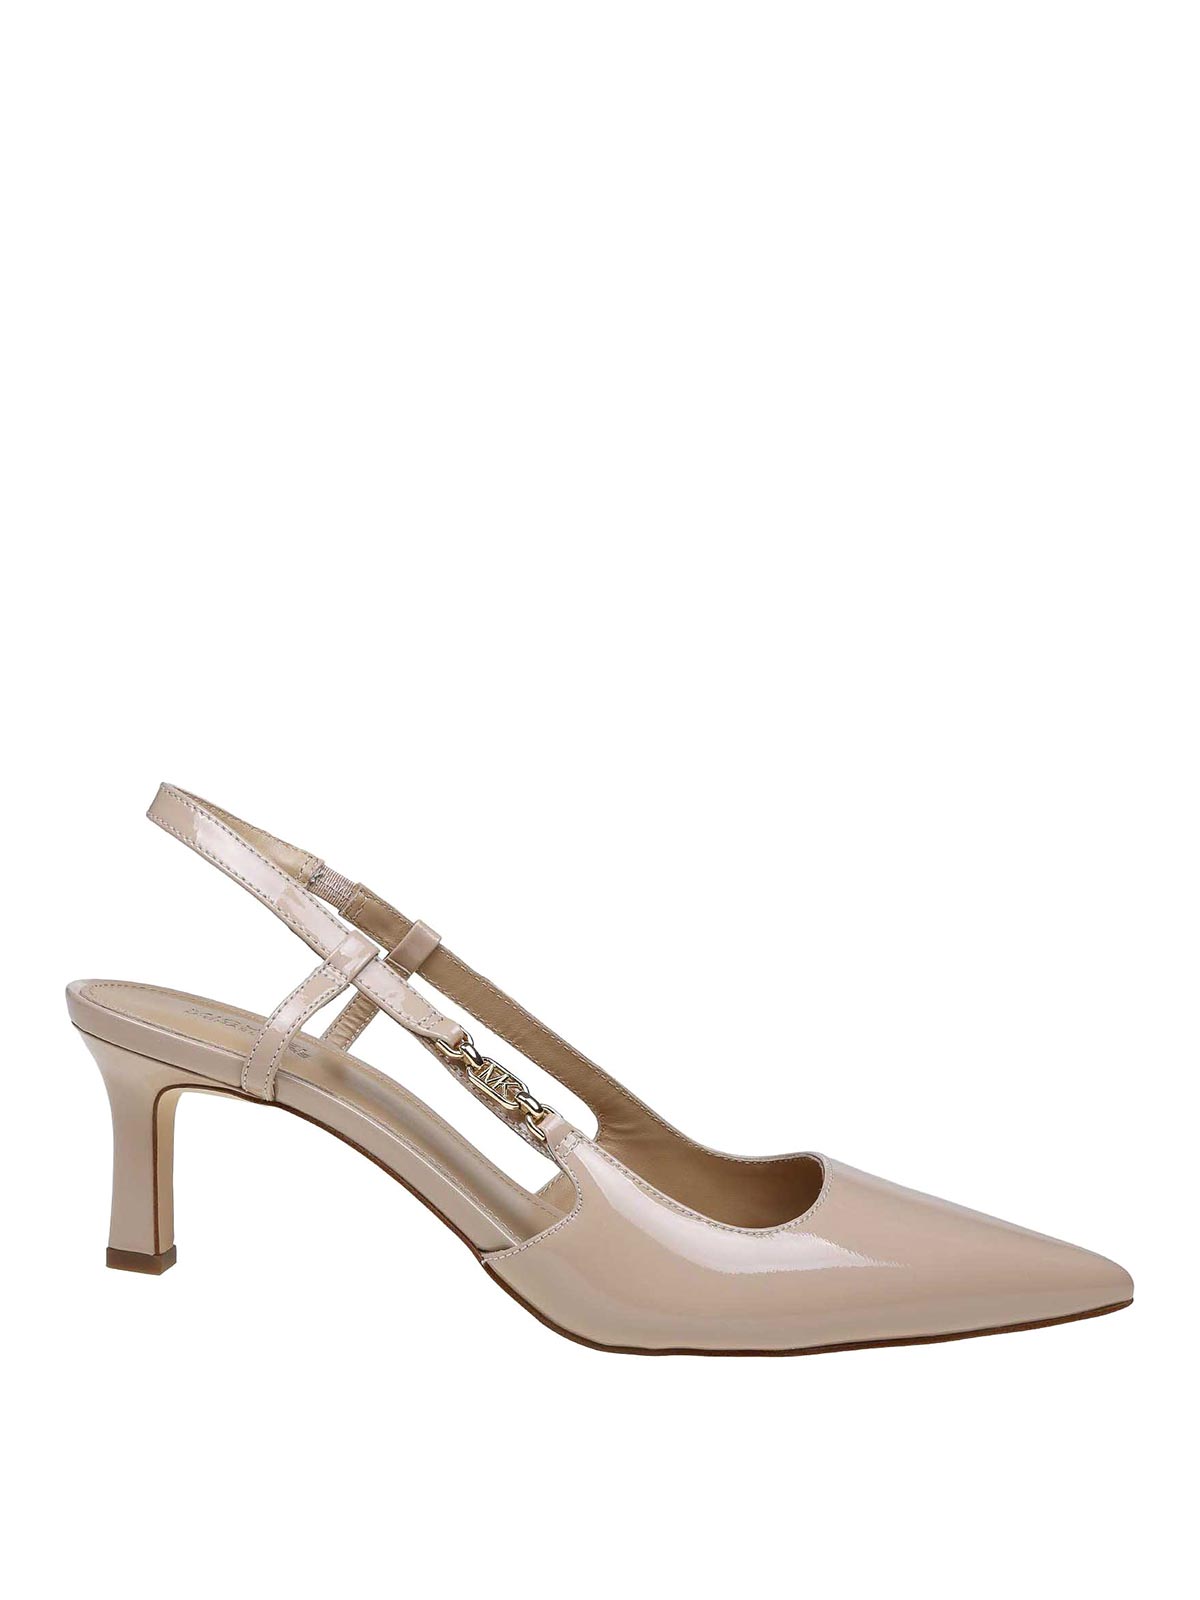 Michael Kors Patent Leather Pumps In Pink